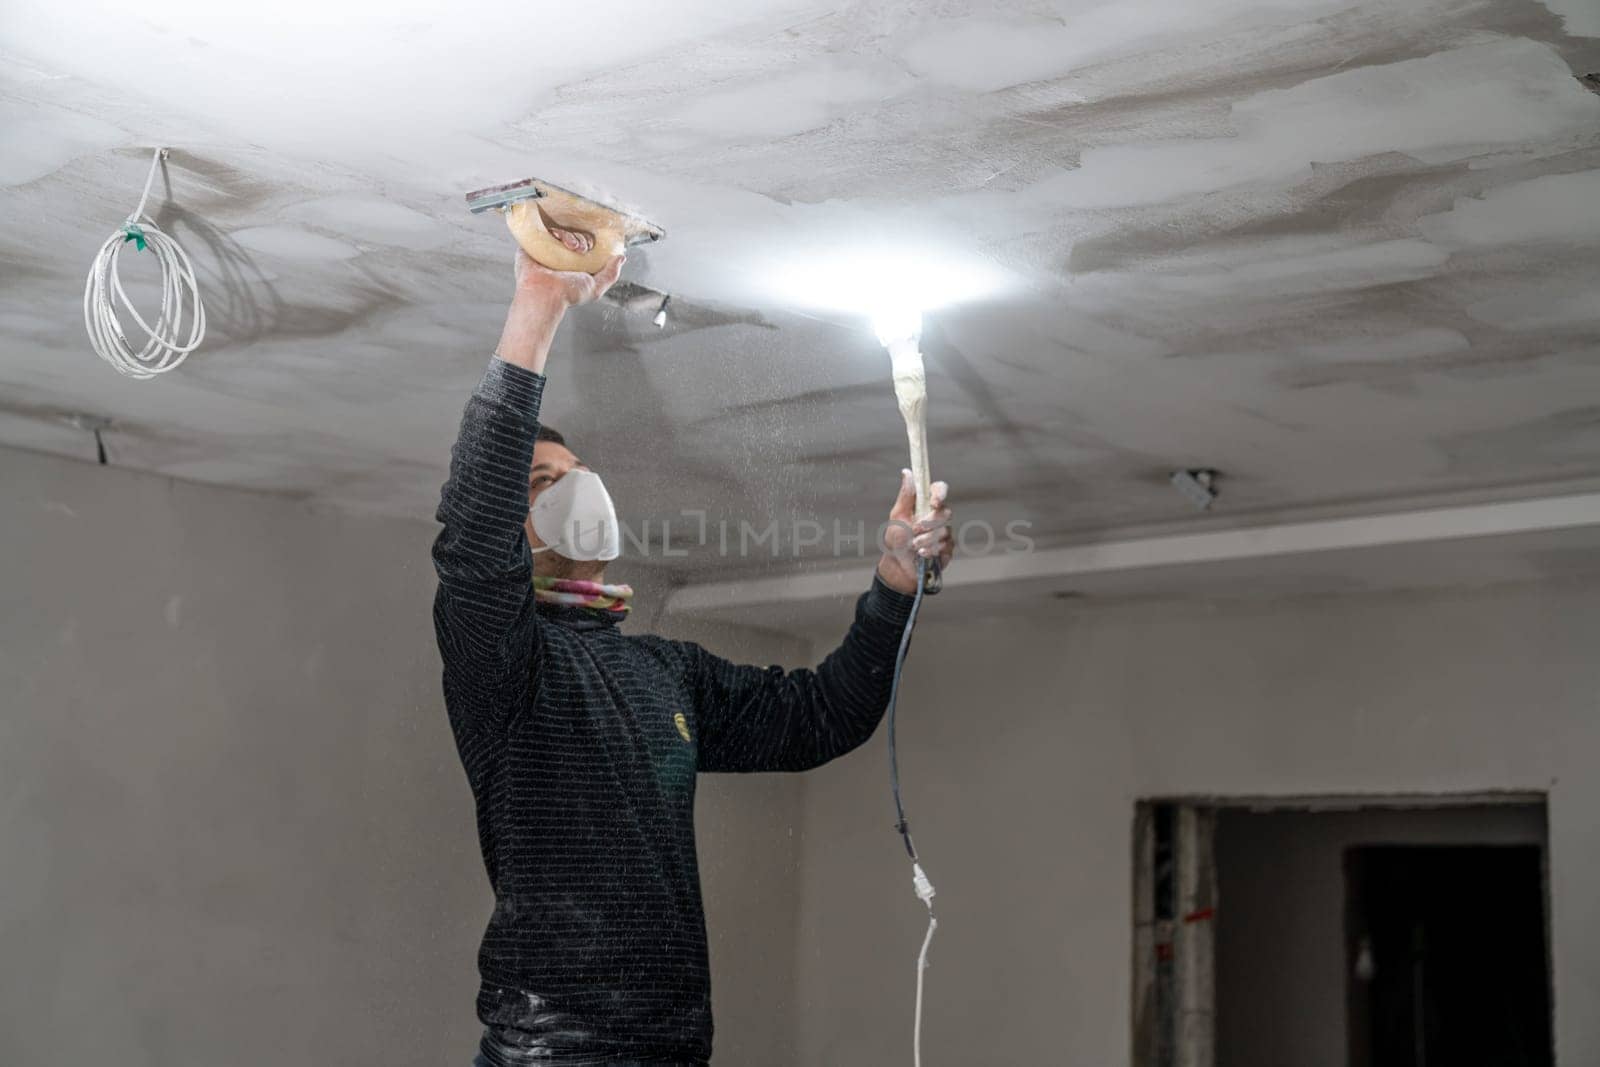 sanding a plasterboard ceiling in a new building with a trowel by Edophoto